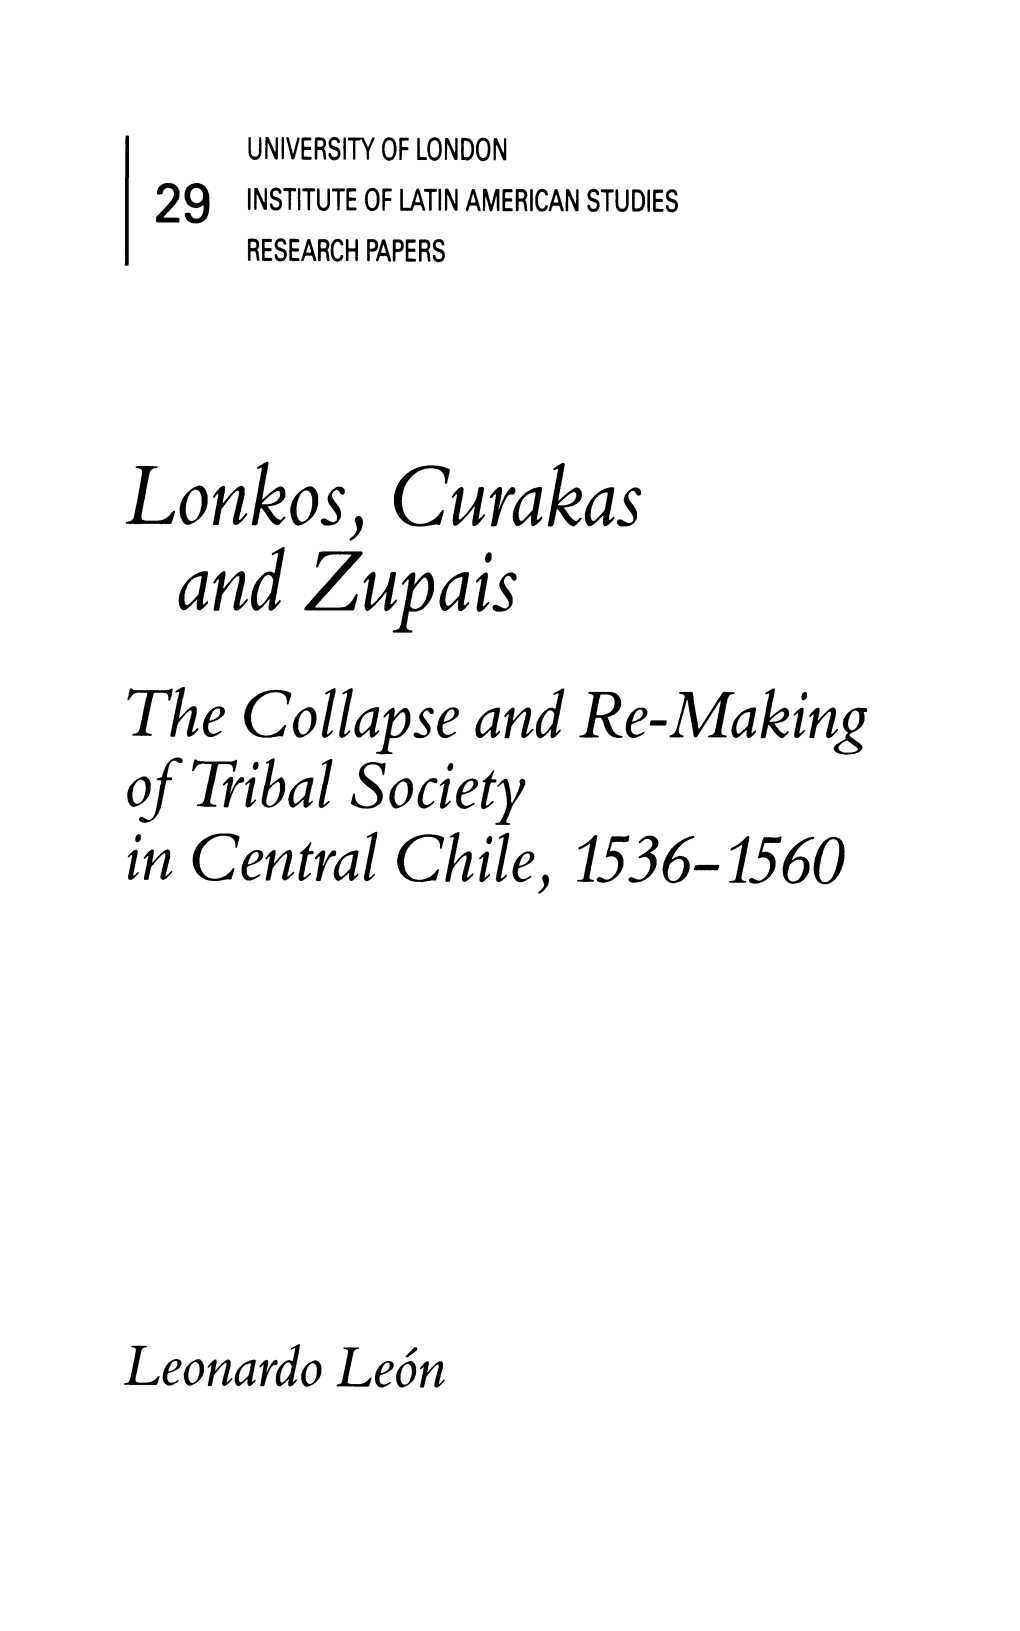 Lonkos, Curakas and Zupais the Collapse and Re-Making of Tribal Society in Central Chile, 1536-1560